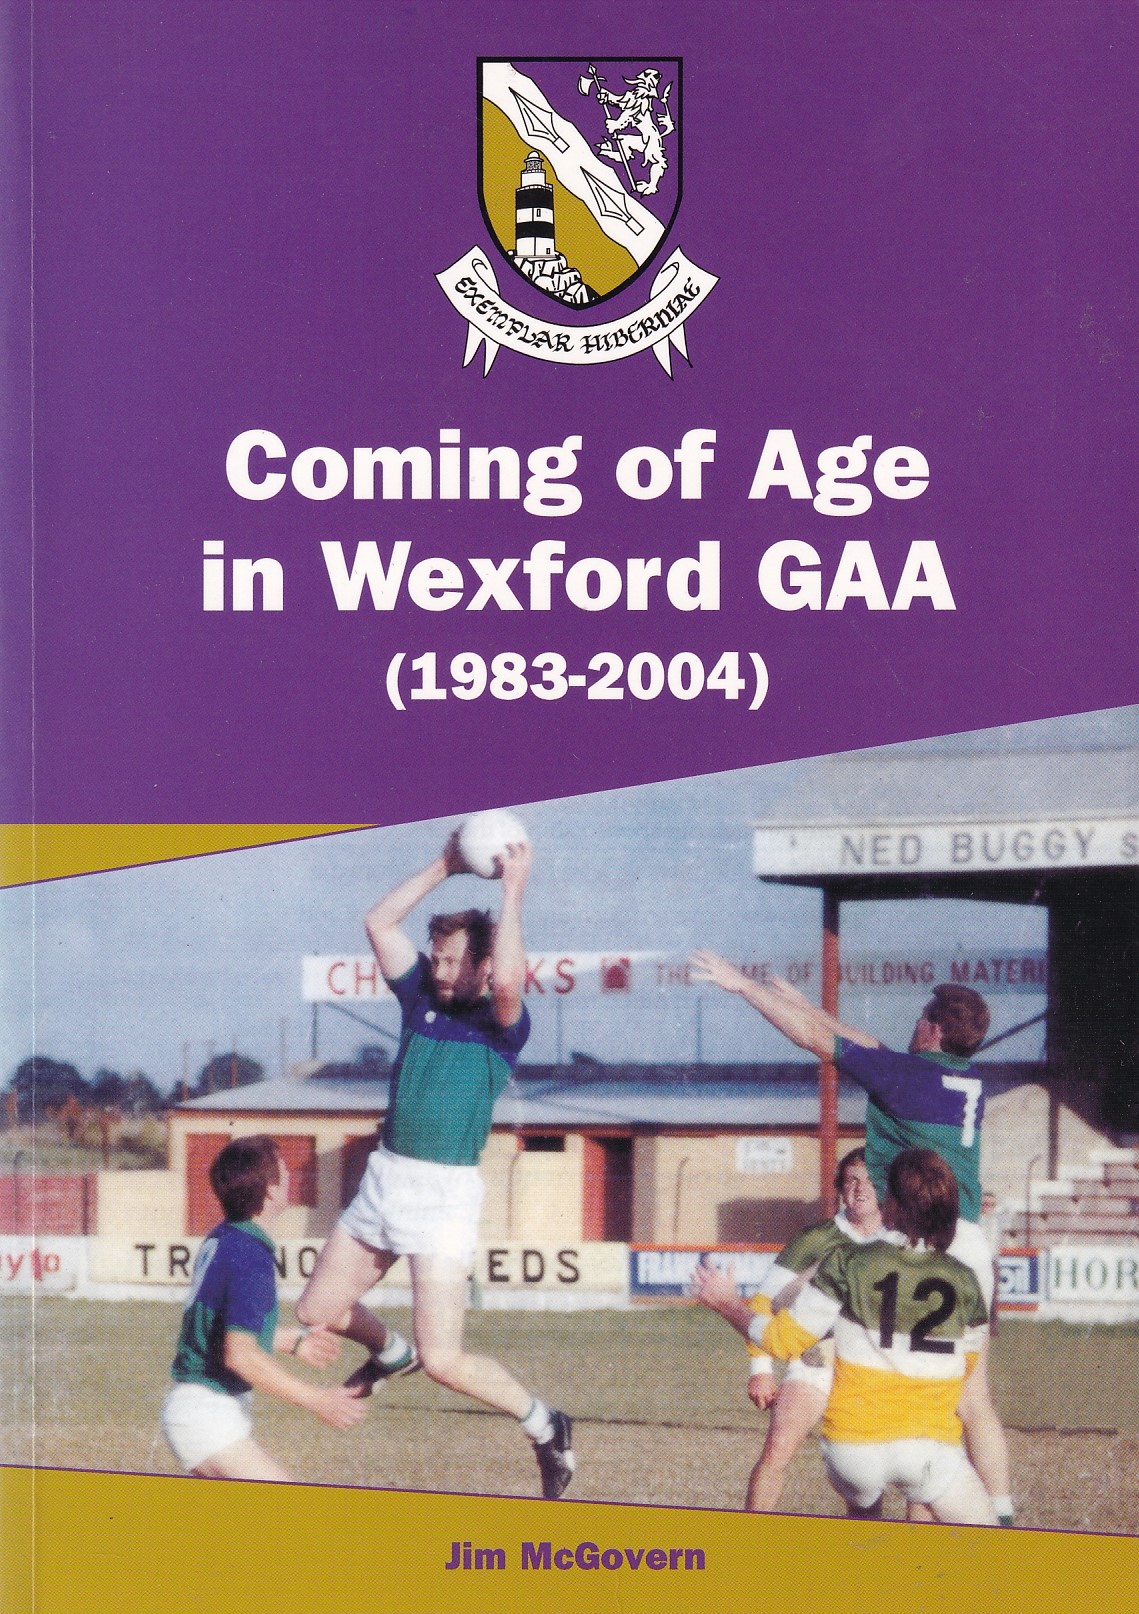 Coming of Age in Wexford G.A.A. (1983-2004) by McGovern, James